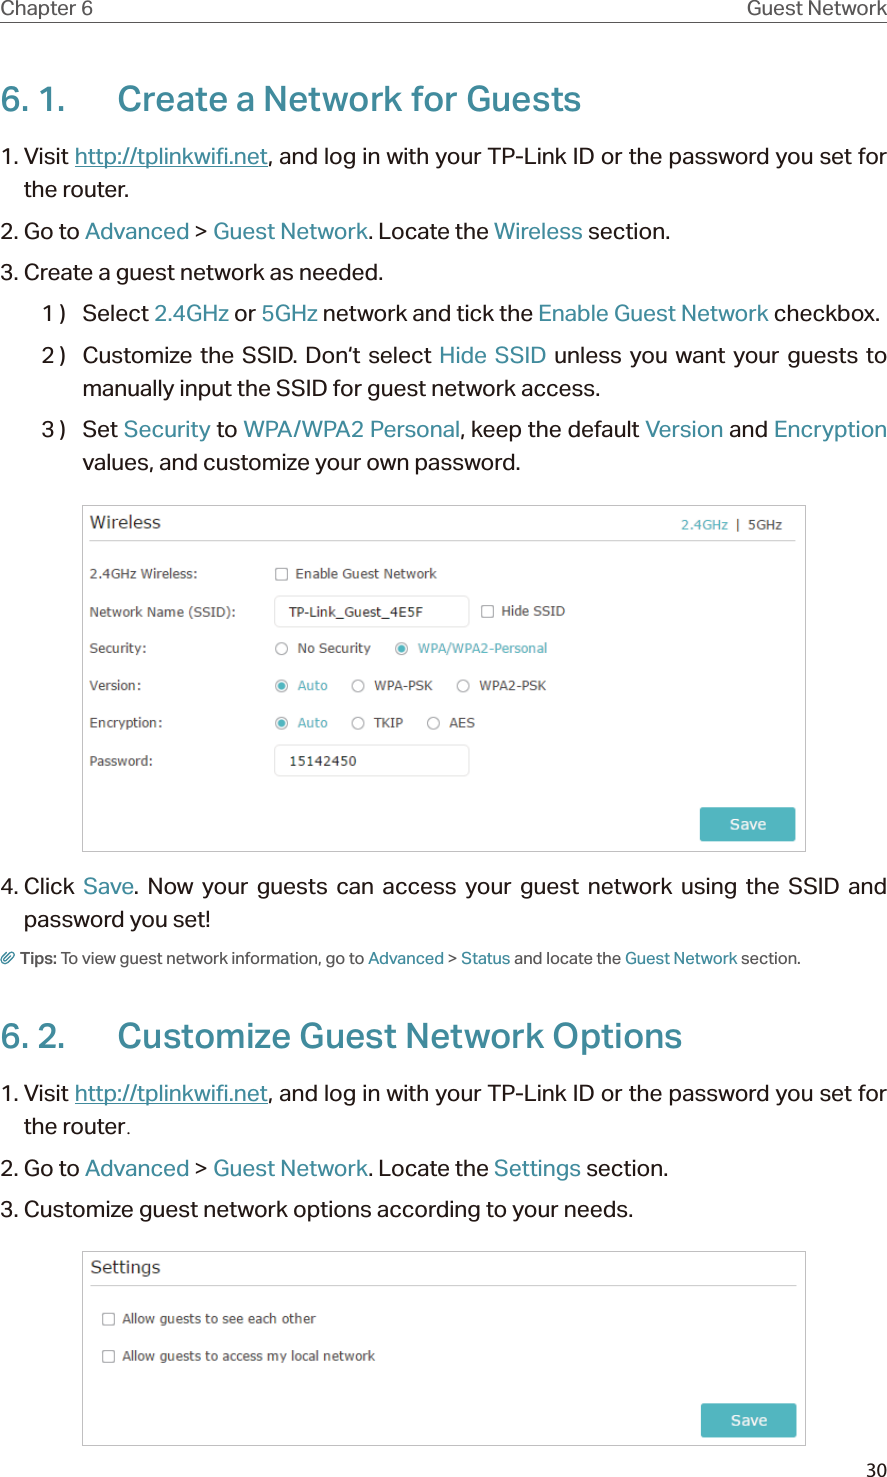 30Chapter 6 Guest Network6. 1.  Create a Network for Guests 1. Visit http://tplinkwifi.net, and log in with your TP-Link ID or the password you set for the router.2. Go to Advanced &gt; Guest Network. Locate the Wireless section.3. Create a guest network as needed.1 )  Select 2.4GHz or 5GHz network and tick the Enable Guest Network checkbox.2 )  Customize the SSID. Don‘t select Hide SSID unless you want your guests to manually input the SSID for guest network access.3 )  Set Security to WPA/WPA2 Personal, keep the default Version and Encryption values, and customize your own password. 4. Click  Save. Now your guests can access your guest network using the SSID and password you set!Tips: To view guest network information, go to Advanced &gt; Status and locate the Guest Network section.6. 2.  Customize Guest Network Options1. Visit http://tplinkwifi.net, and log in with your TP-Link ID or the password you set for the router.2. Go to Advanced &gt; Guest Network. Locate the Settings section.3. Customize guest network options according to your needs.